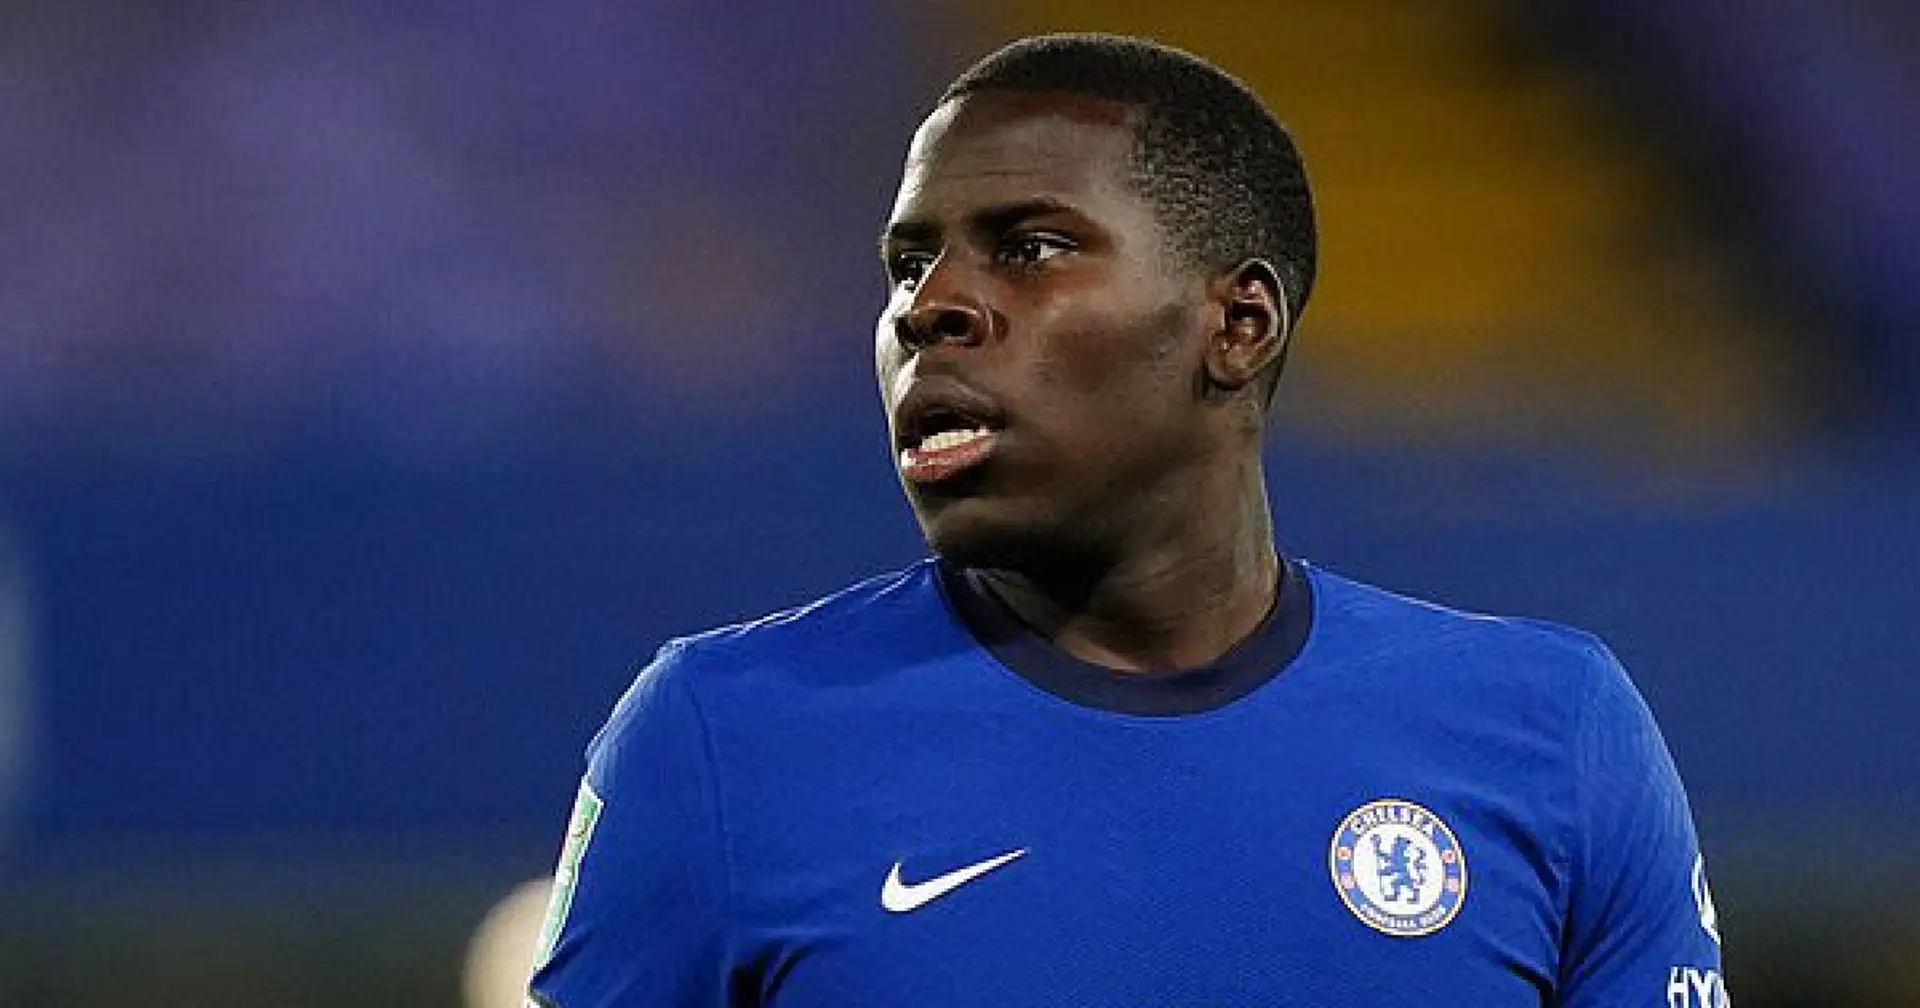 5 clearances, 4 ball recoveries & more: Kurt Zouma's composed performance in numbers